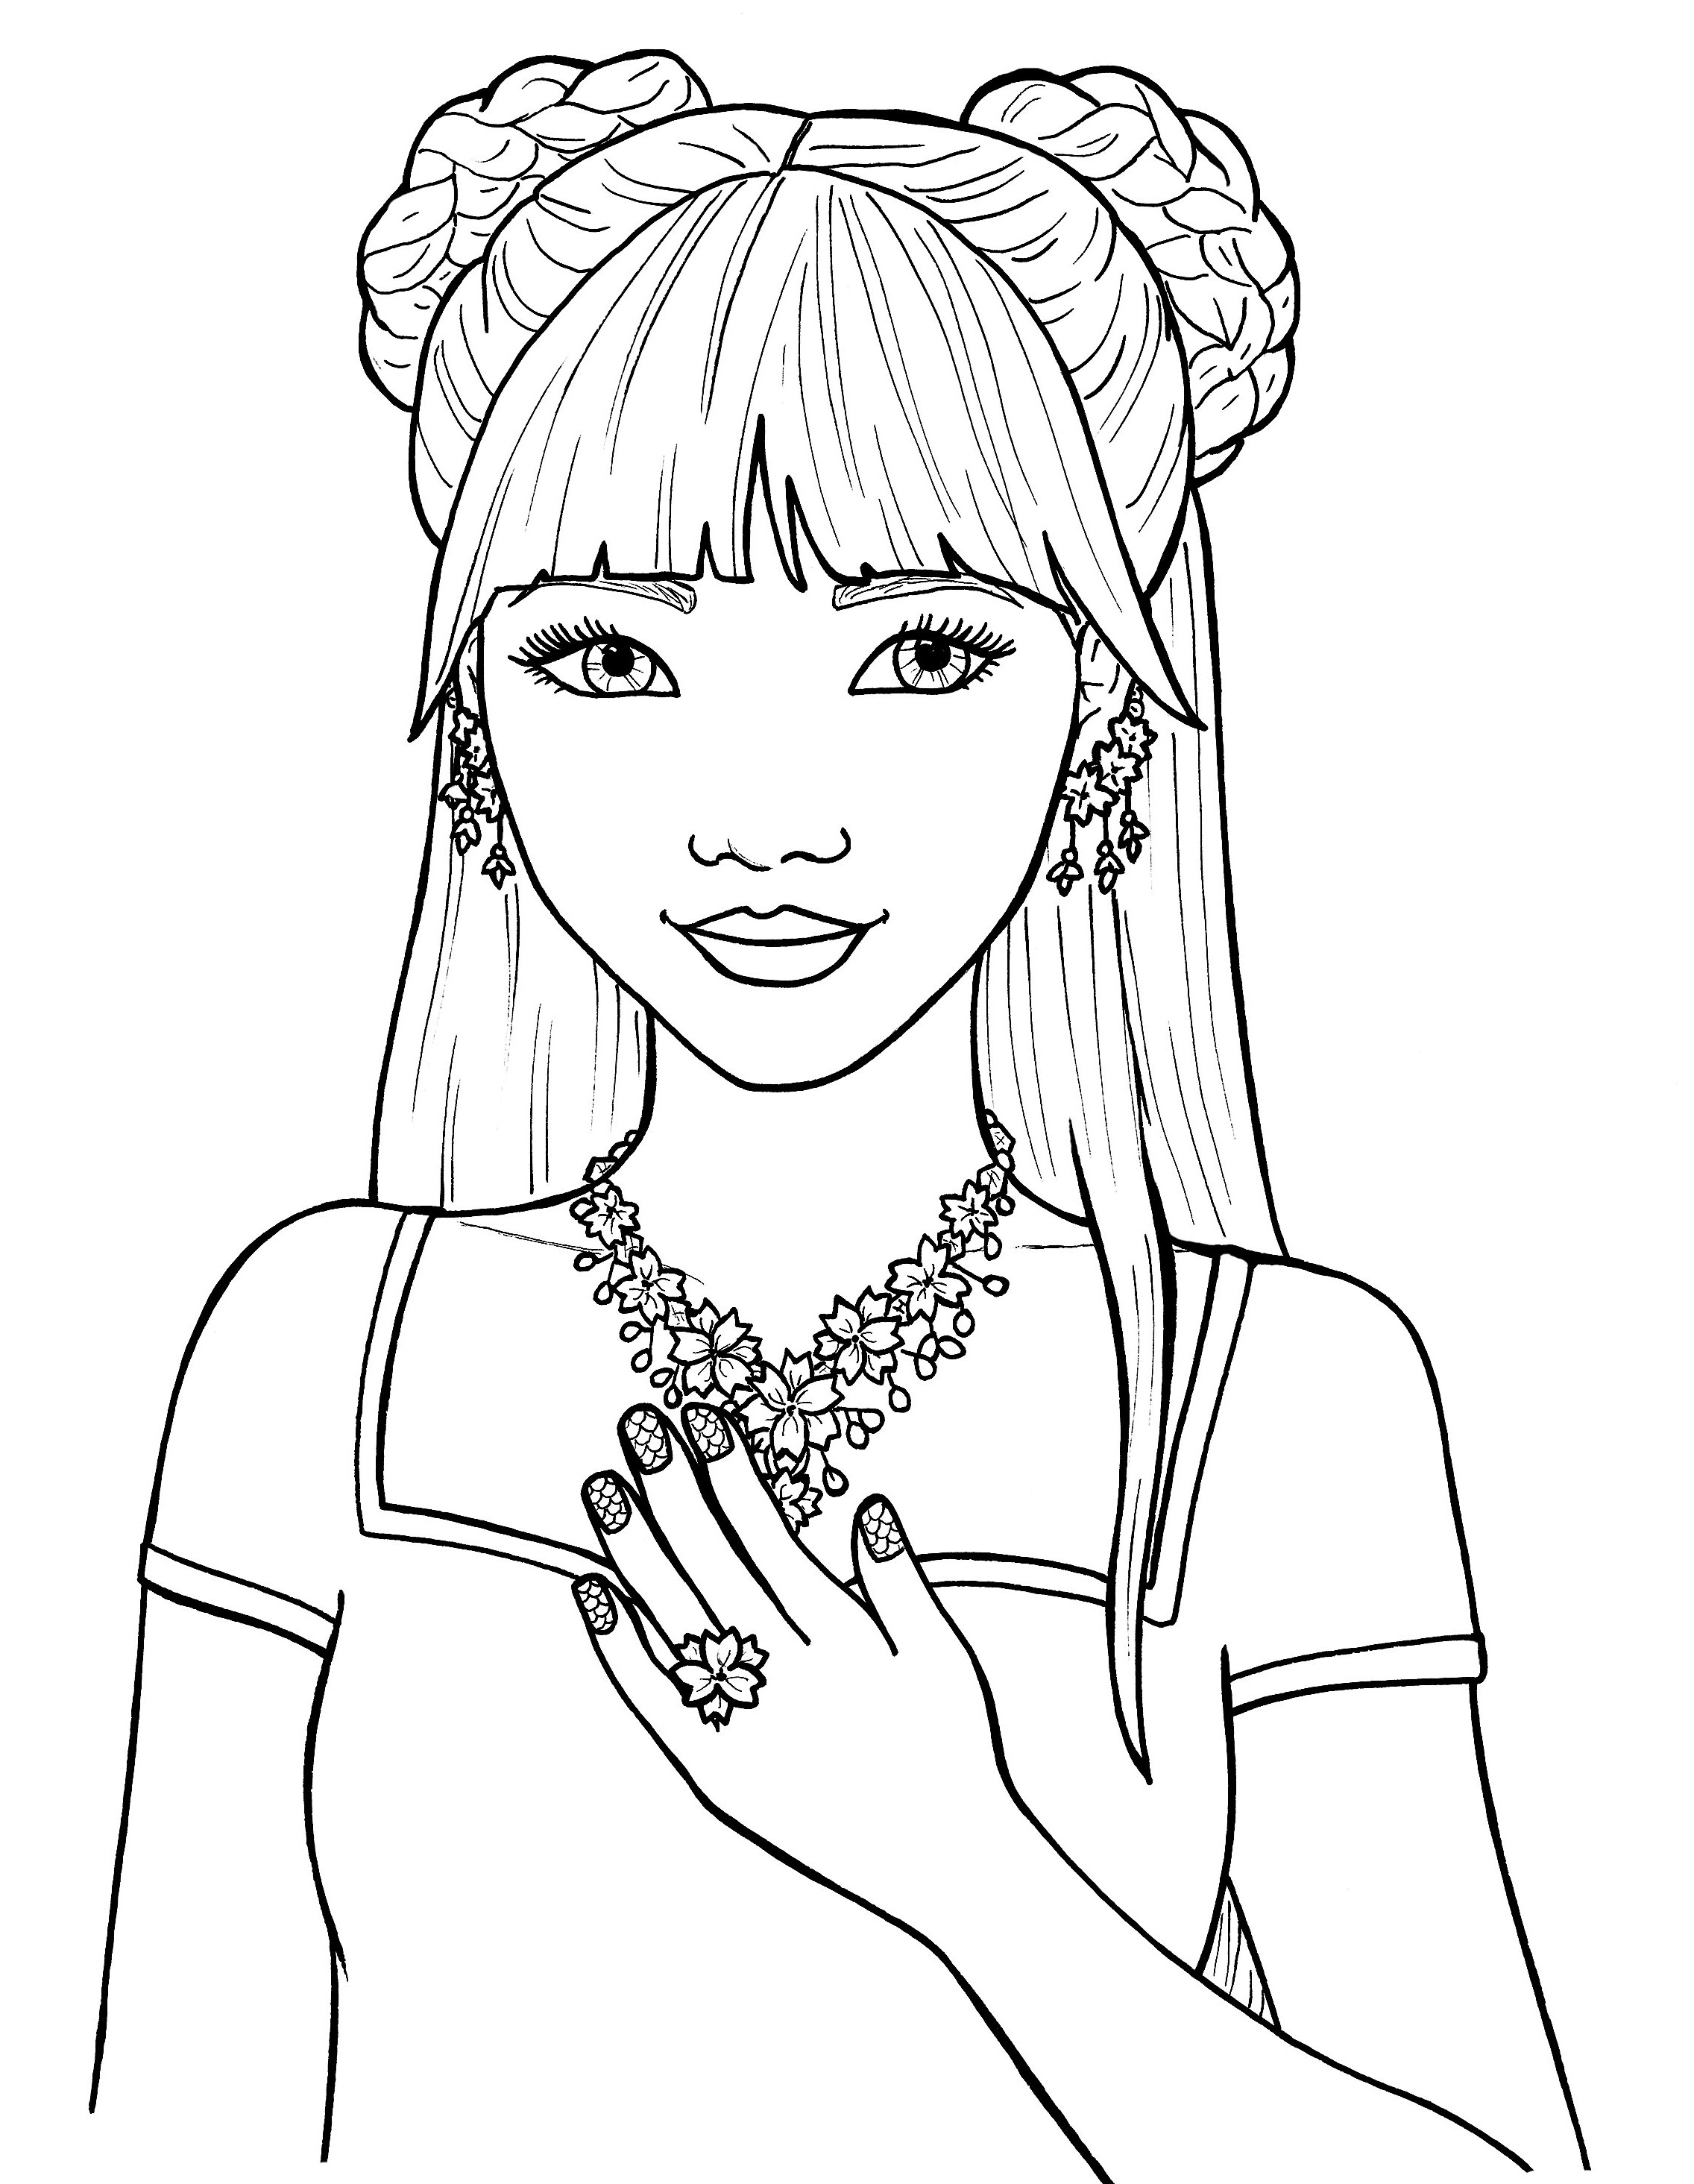 Printable Coloring Pages For Girls At Getcolorings.com | Free Printable